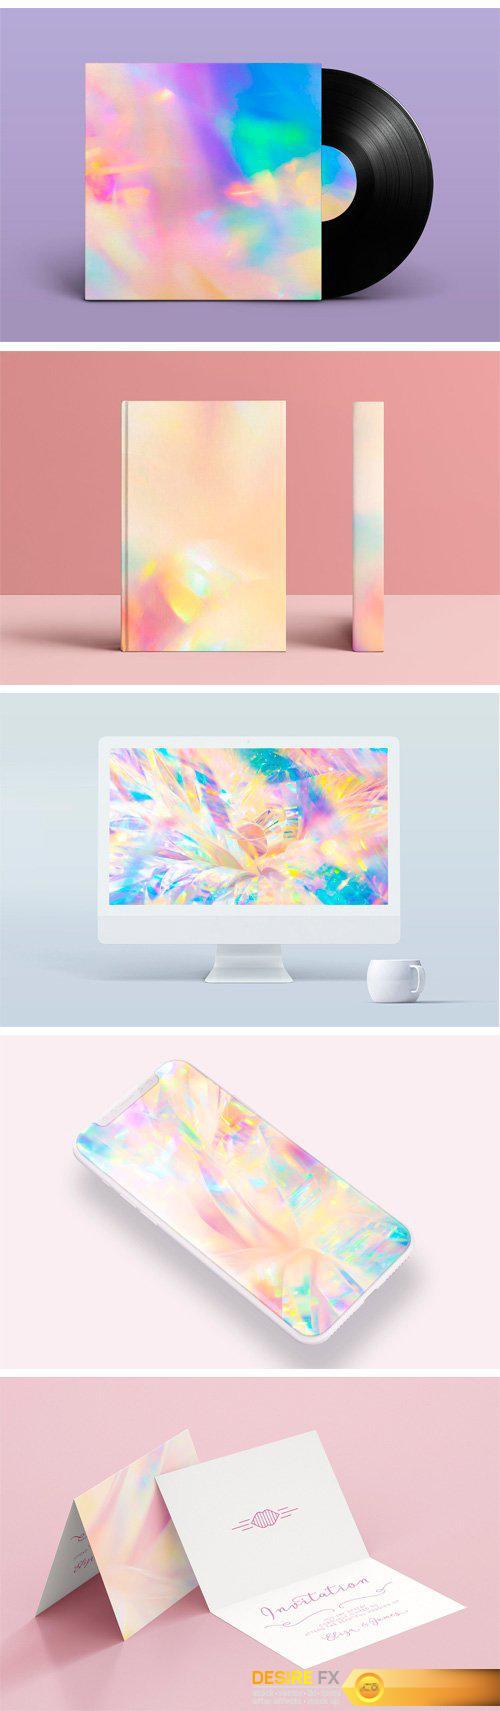 CM - Holographic Backgrounds & Textures 2422998